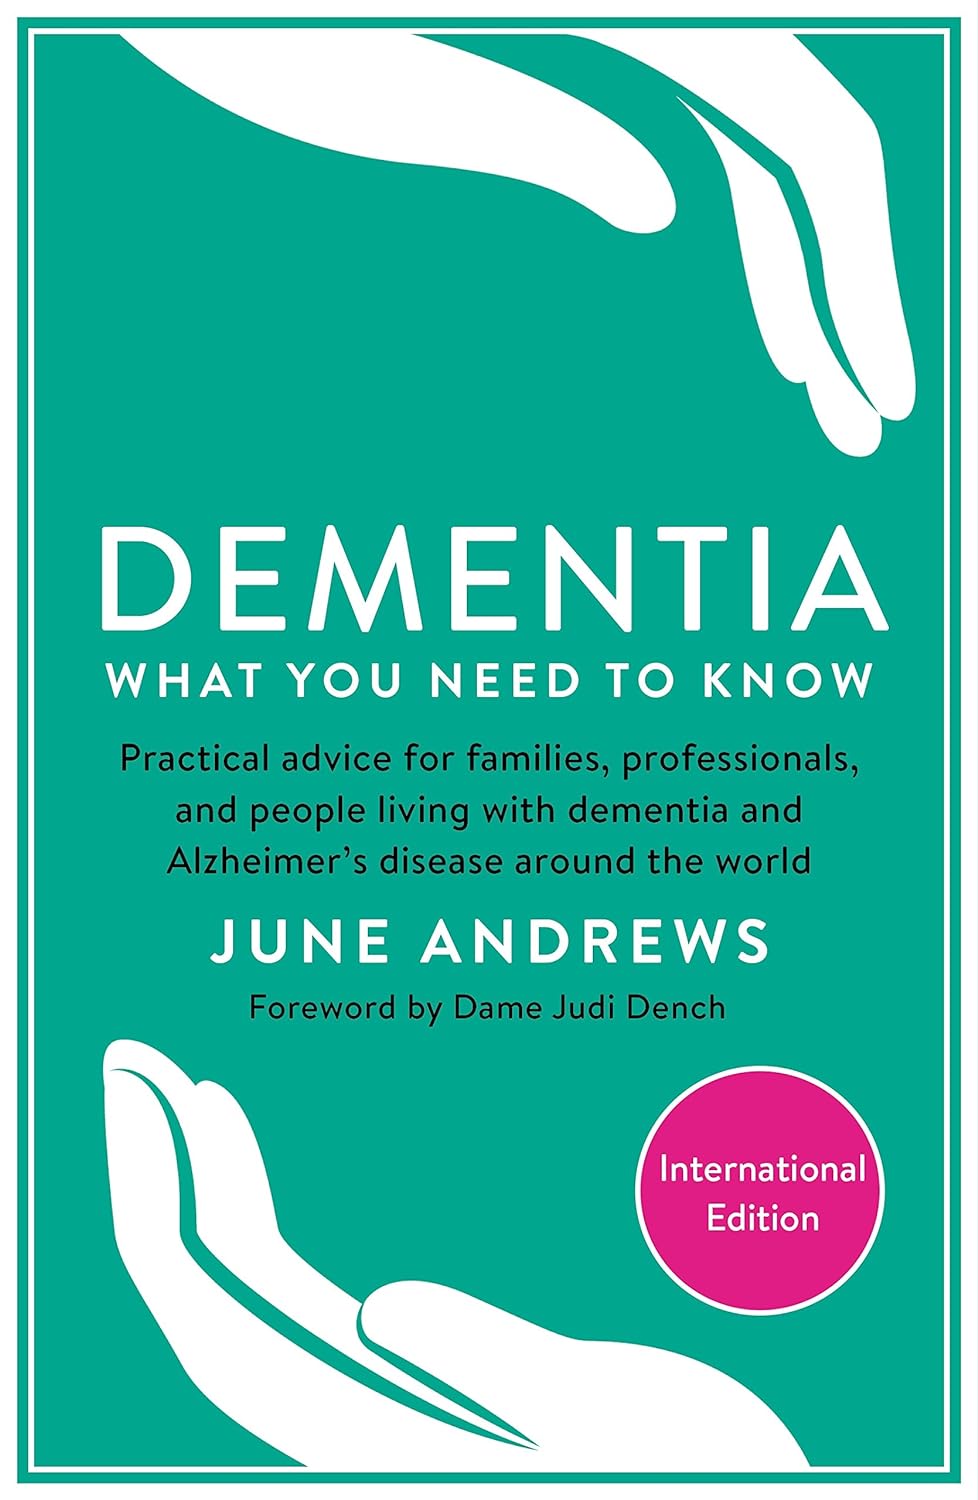 Dementia - What you Need to Know Book